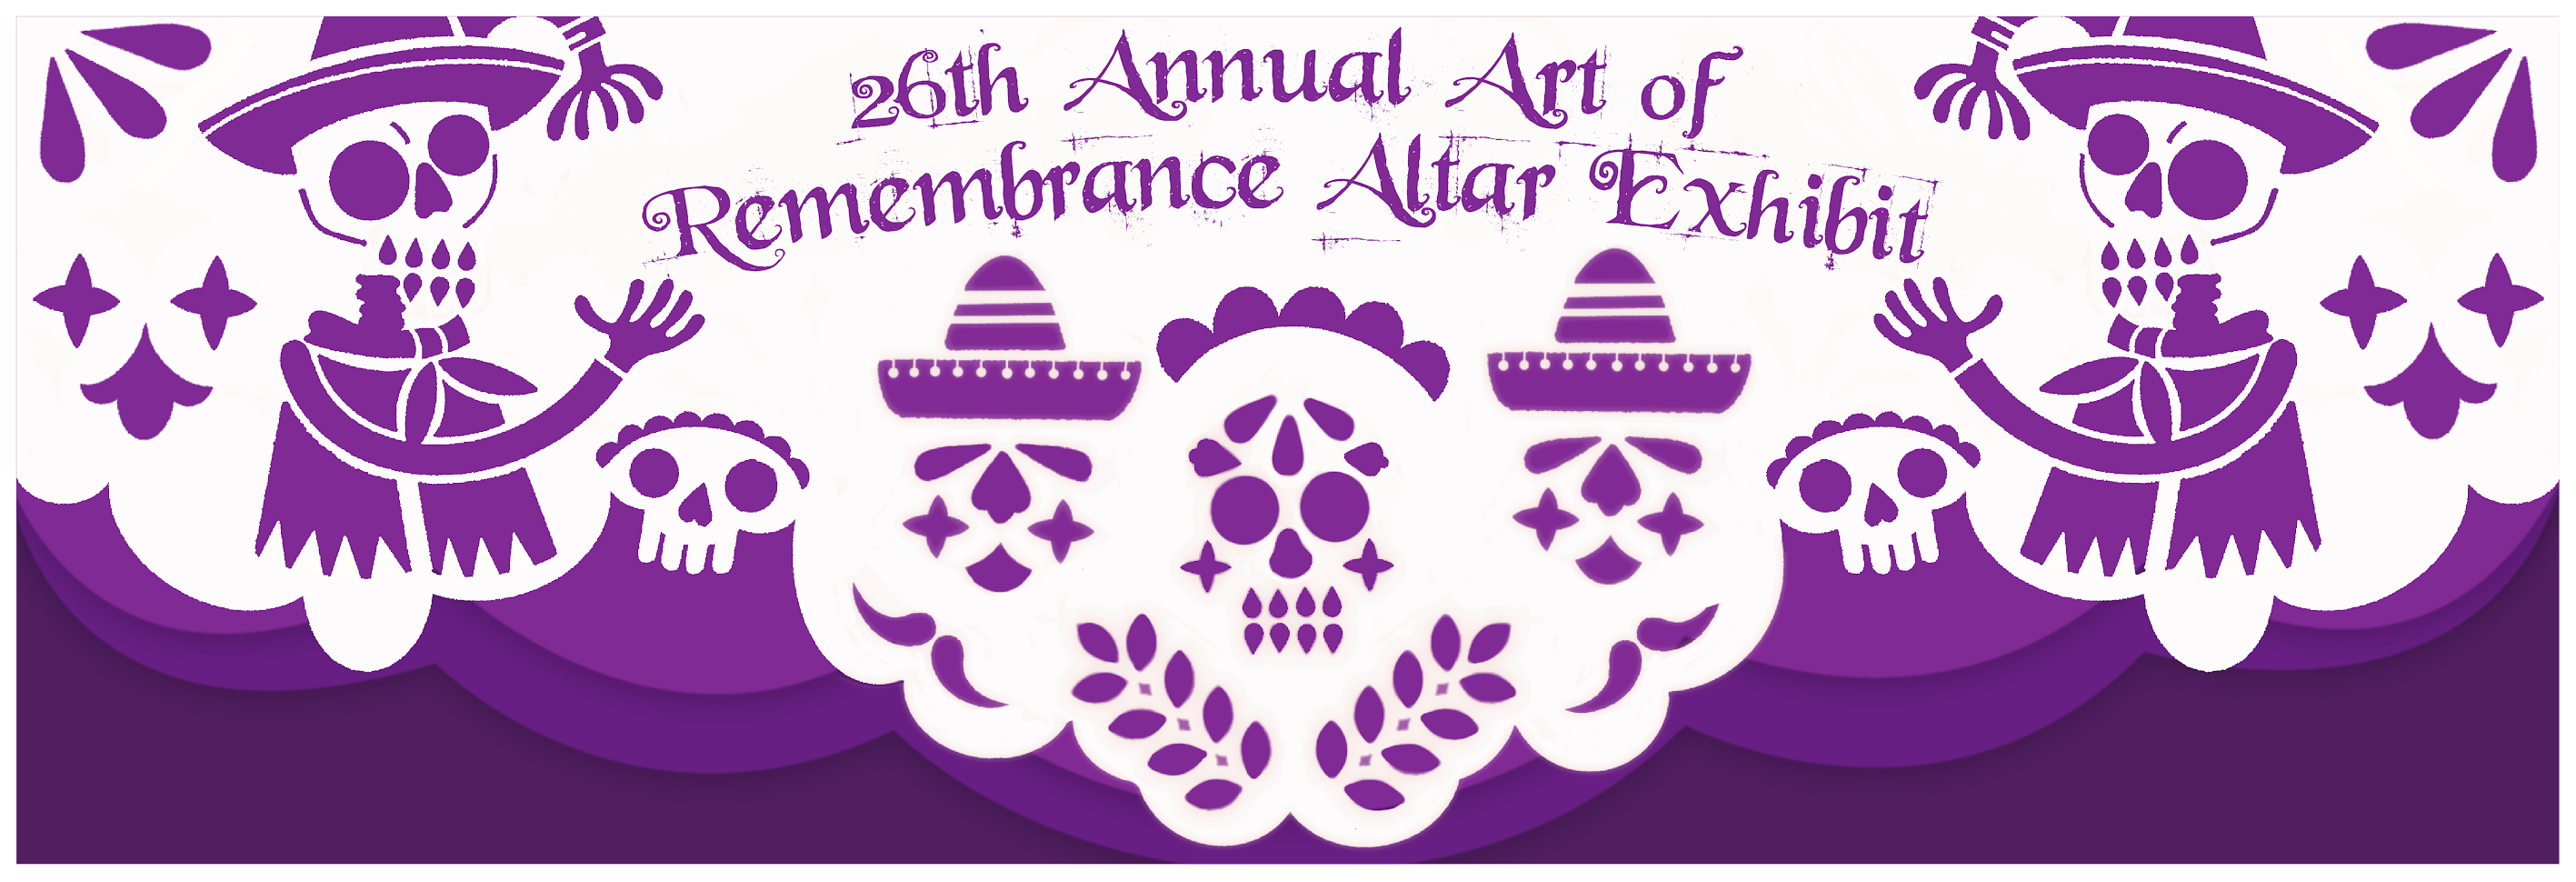 Header image of Art of Remembrance Altar Exhibit